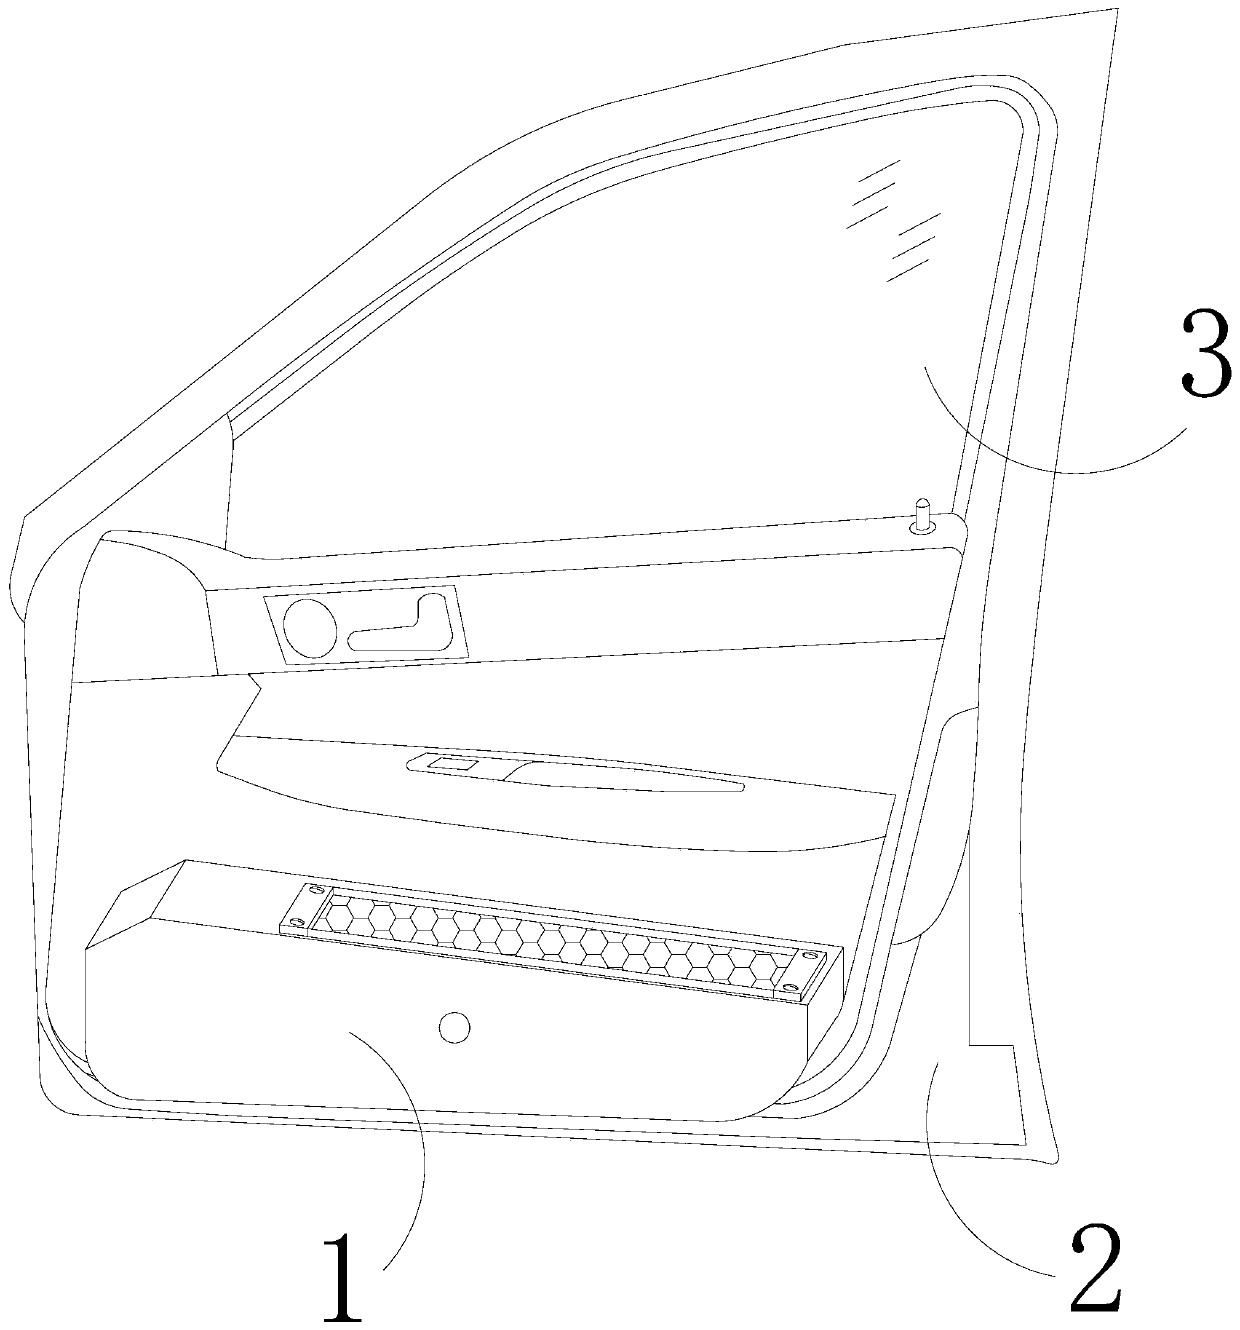 A car door with an umbrella placement device for alternate pumping and uninterrupted air supply